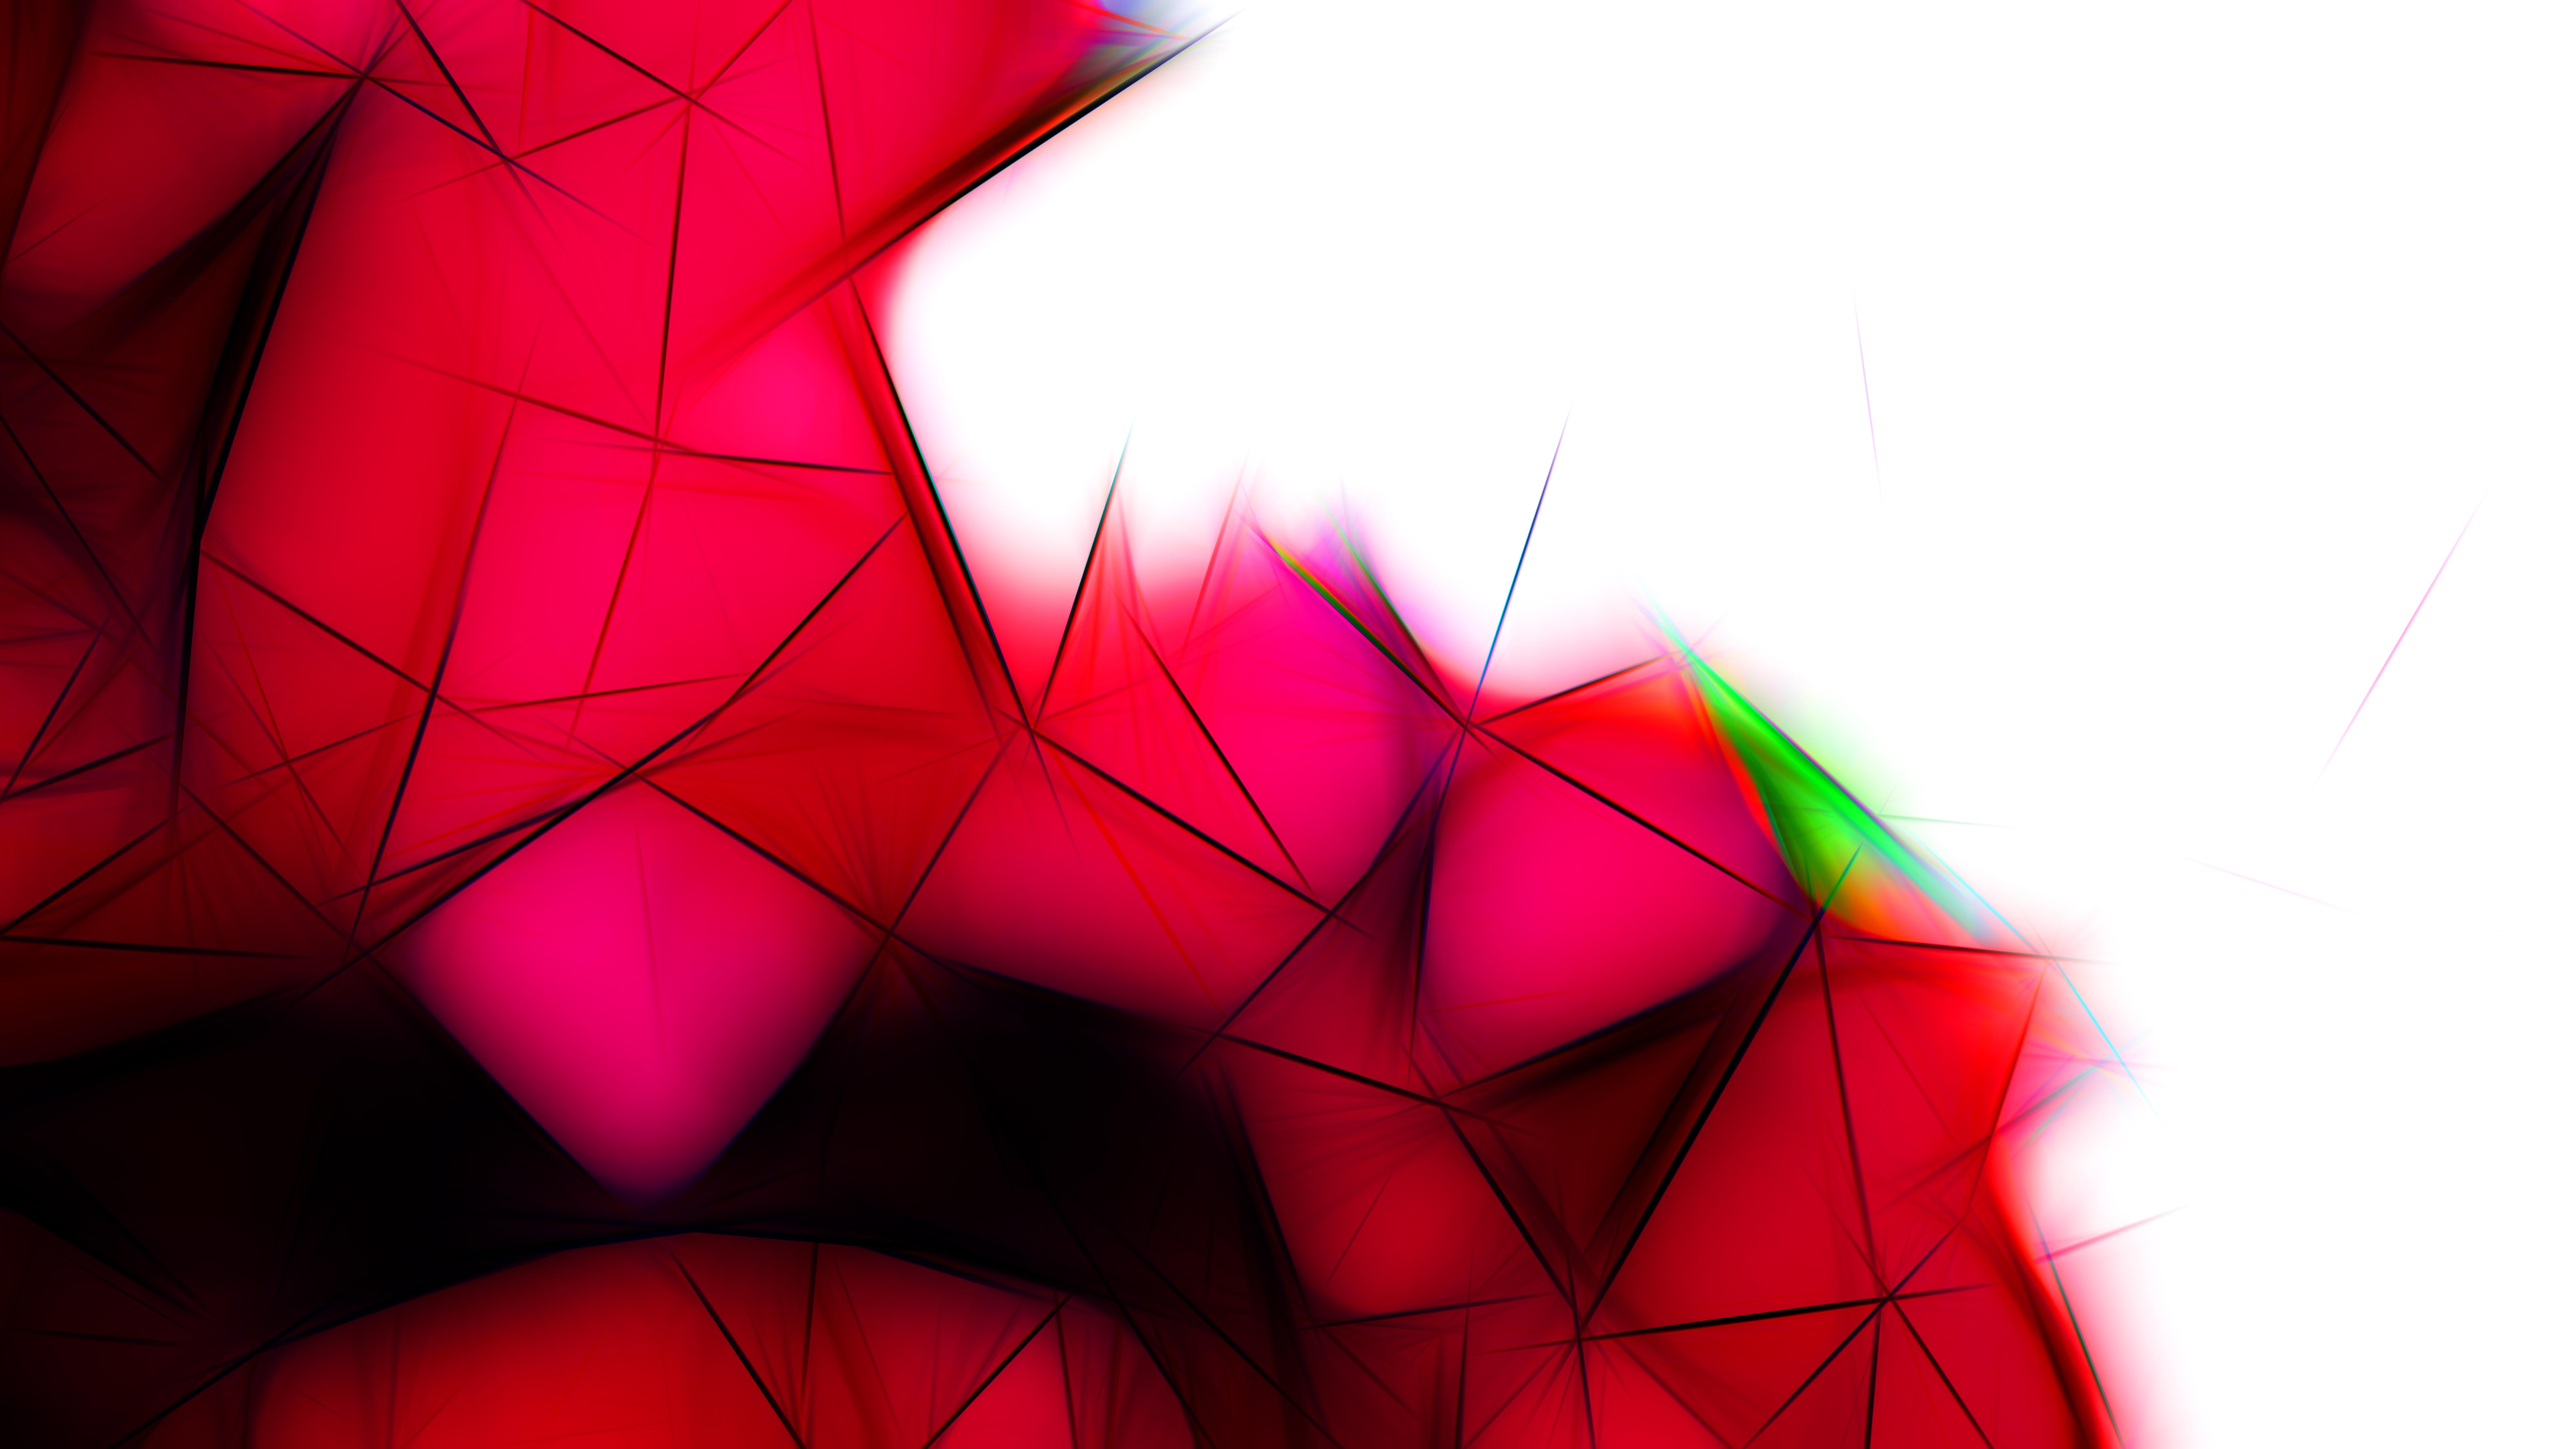 Abstract Red Black and White Fractal Wallpaper